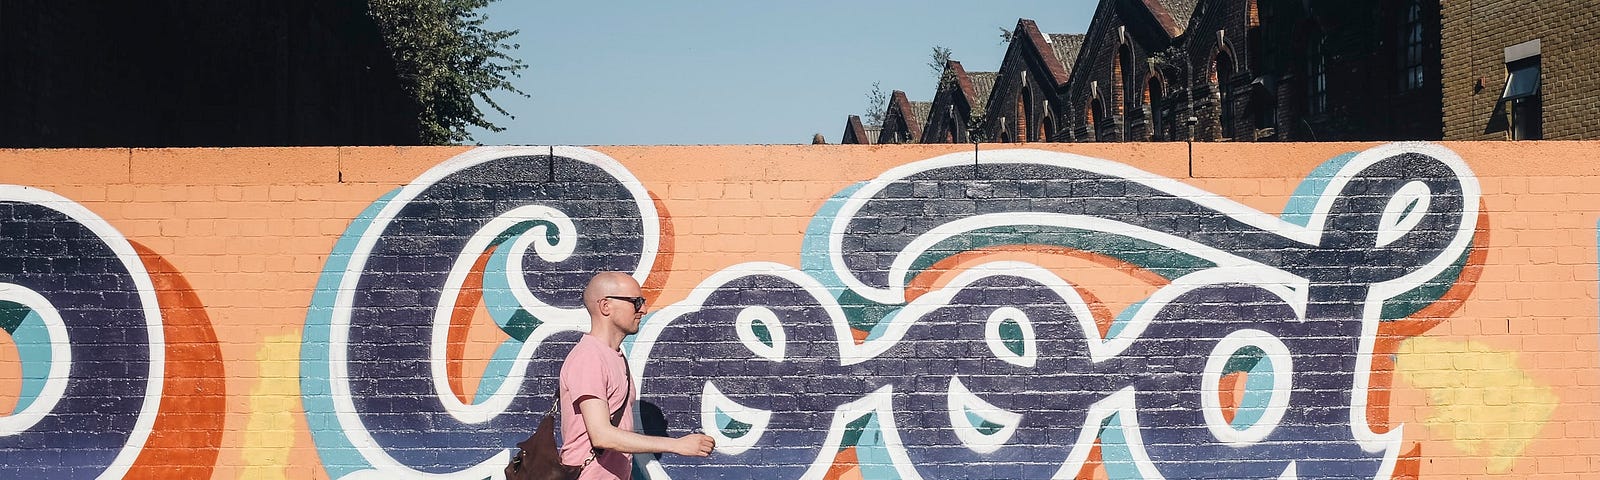 A man walks past a graffiti mural that says “Good” on a bright sunny day.